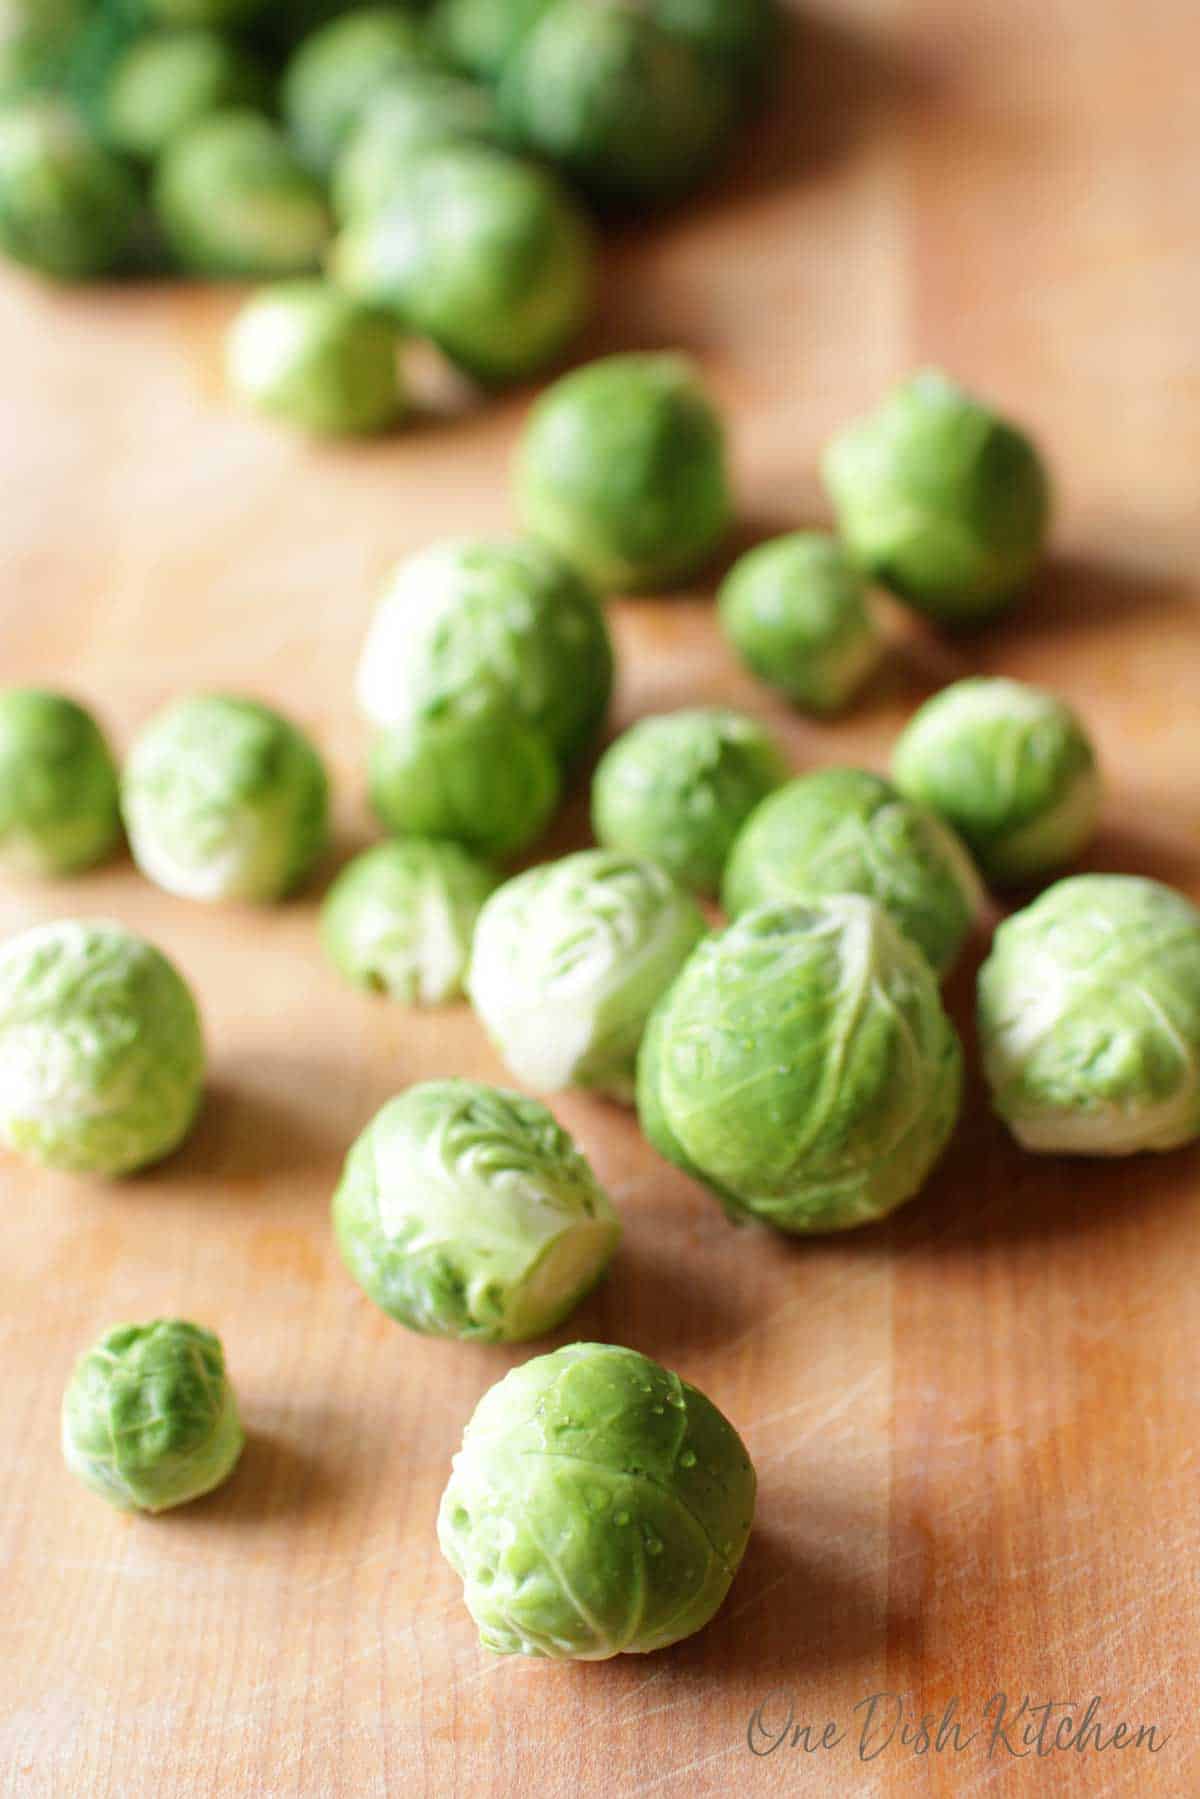 Raw brussels sprouts scattered on a wooden cutting board.